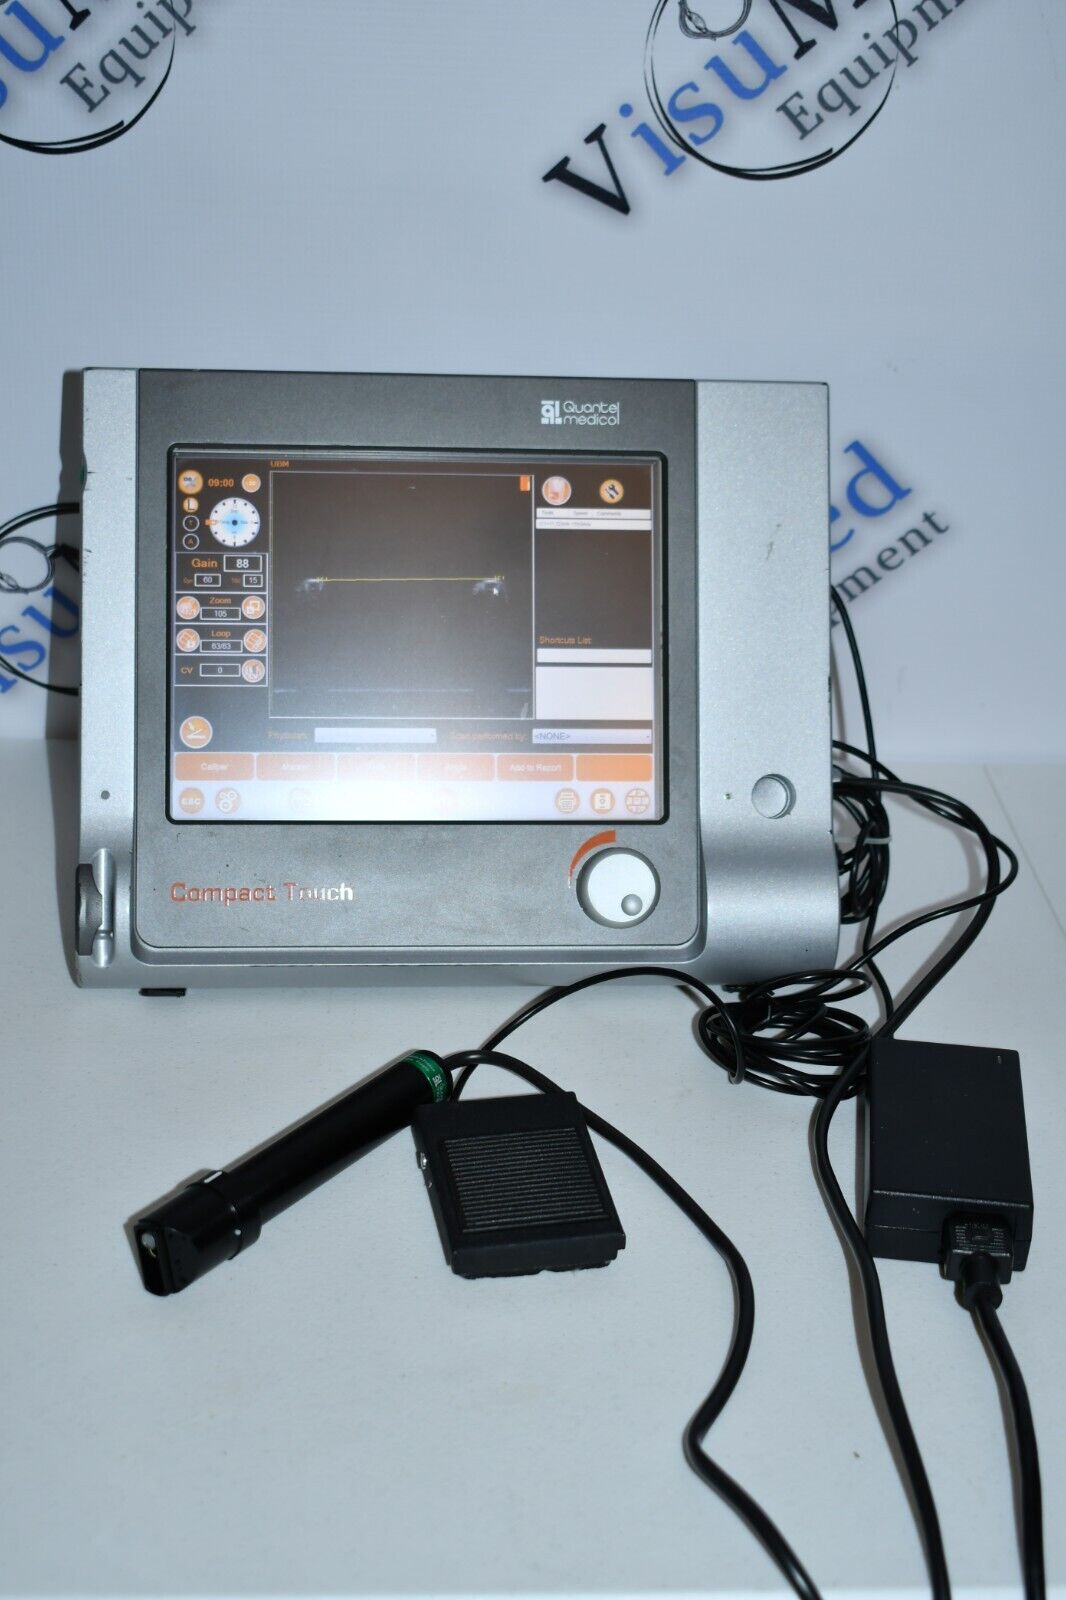 Quantel compact touch STS UBM Ophthalmic ultrasound